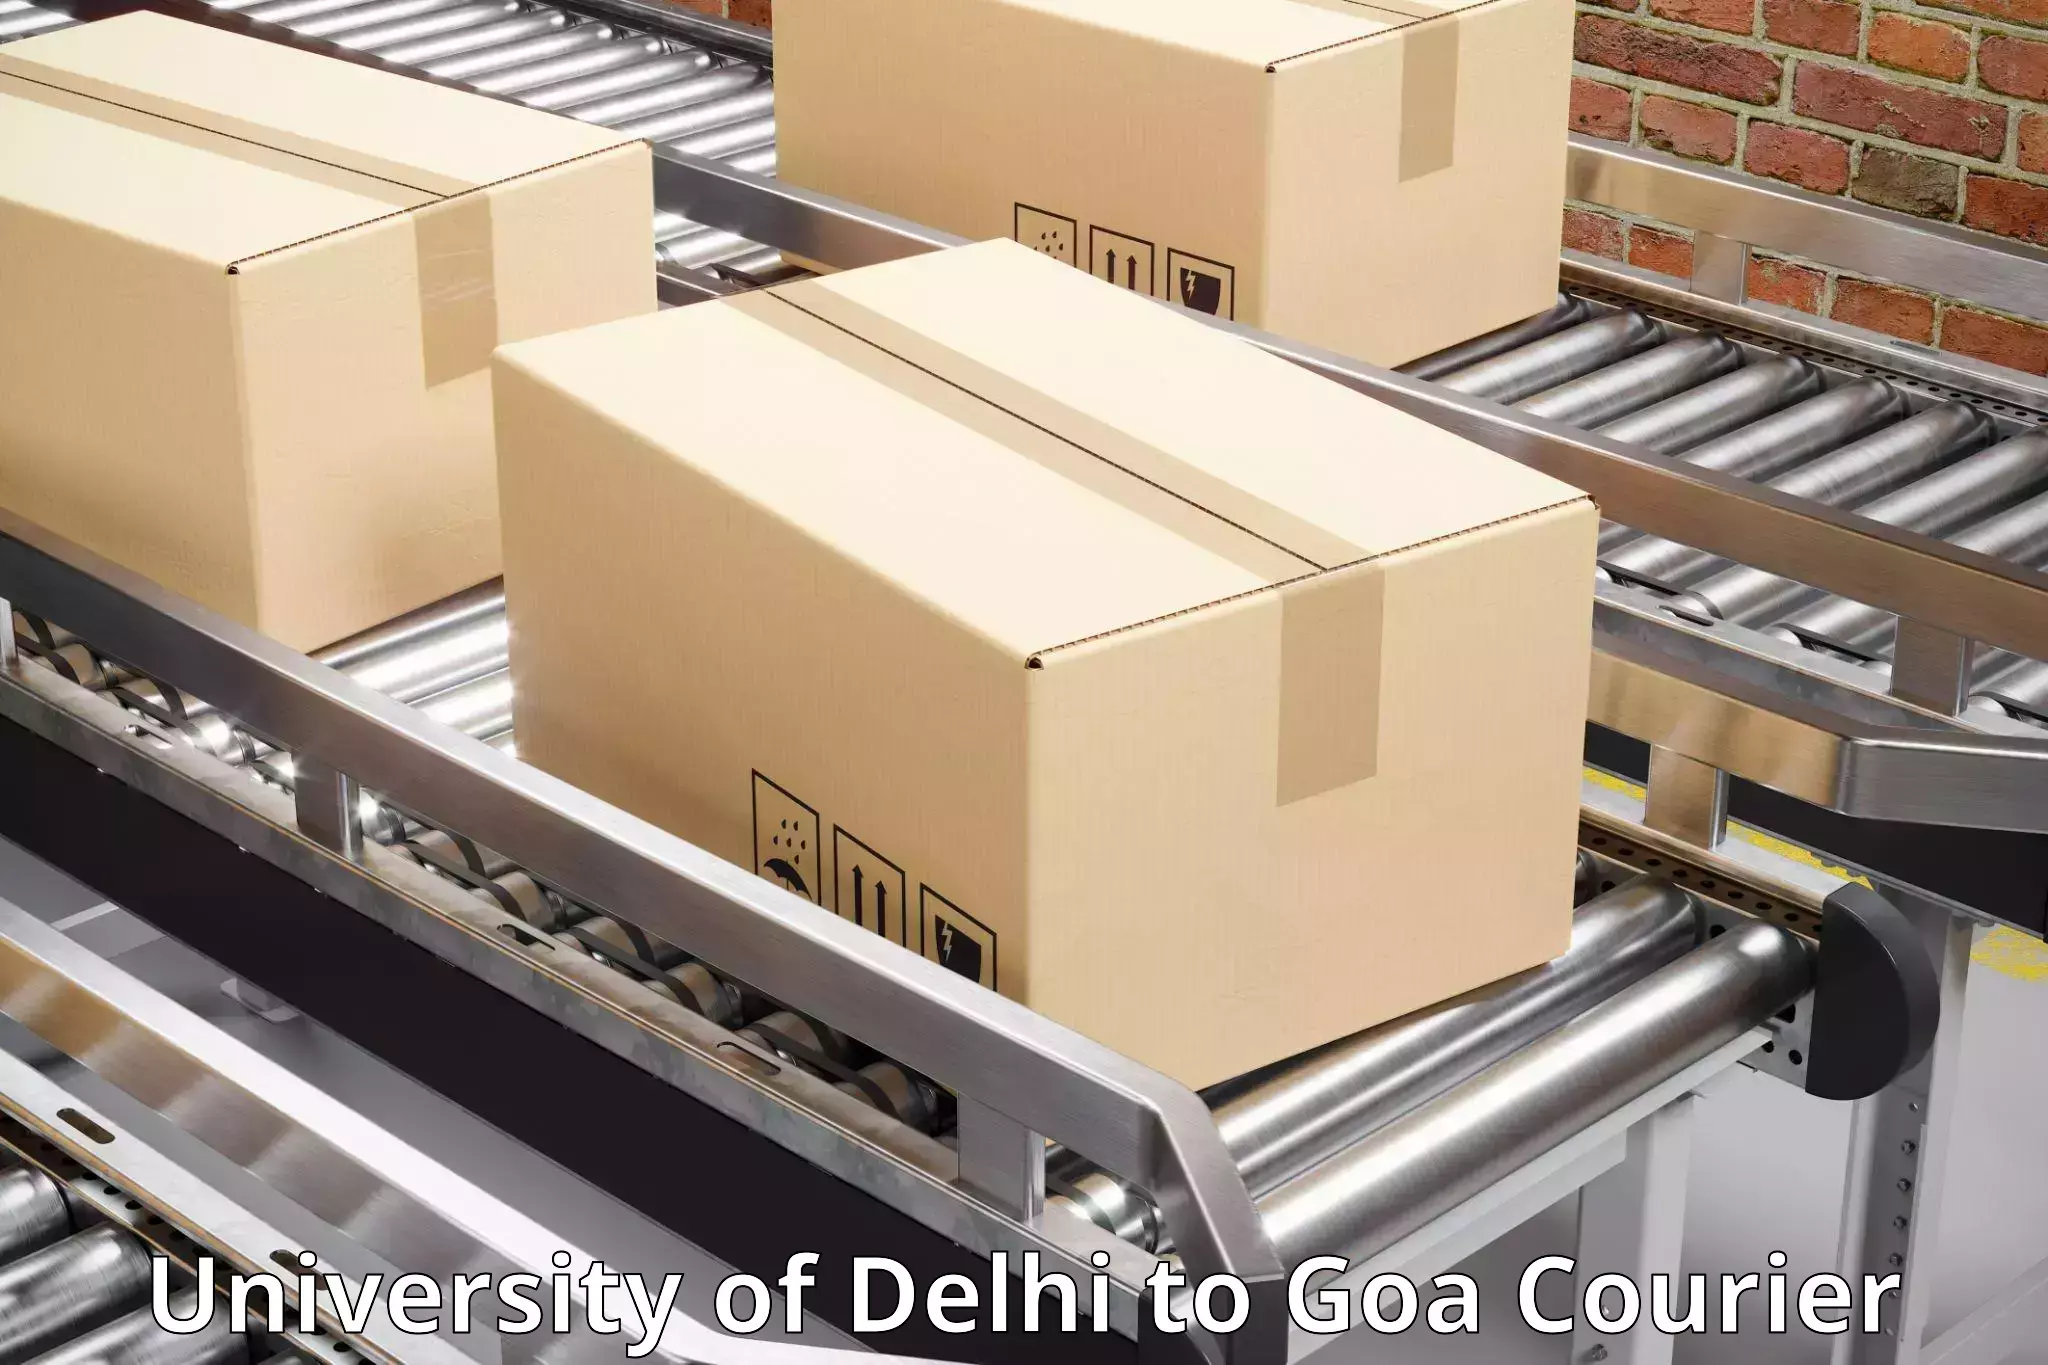 Express delivery network University of Delhi to Goa